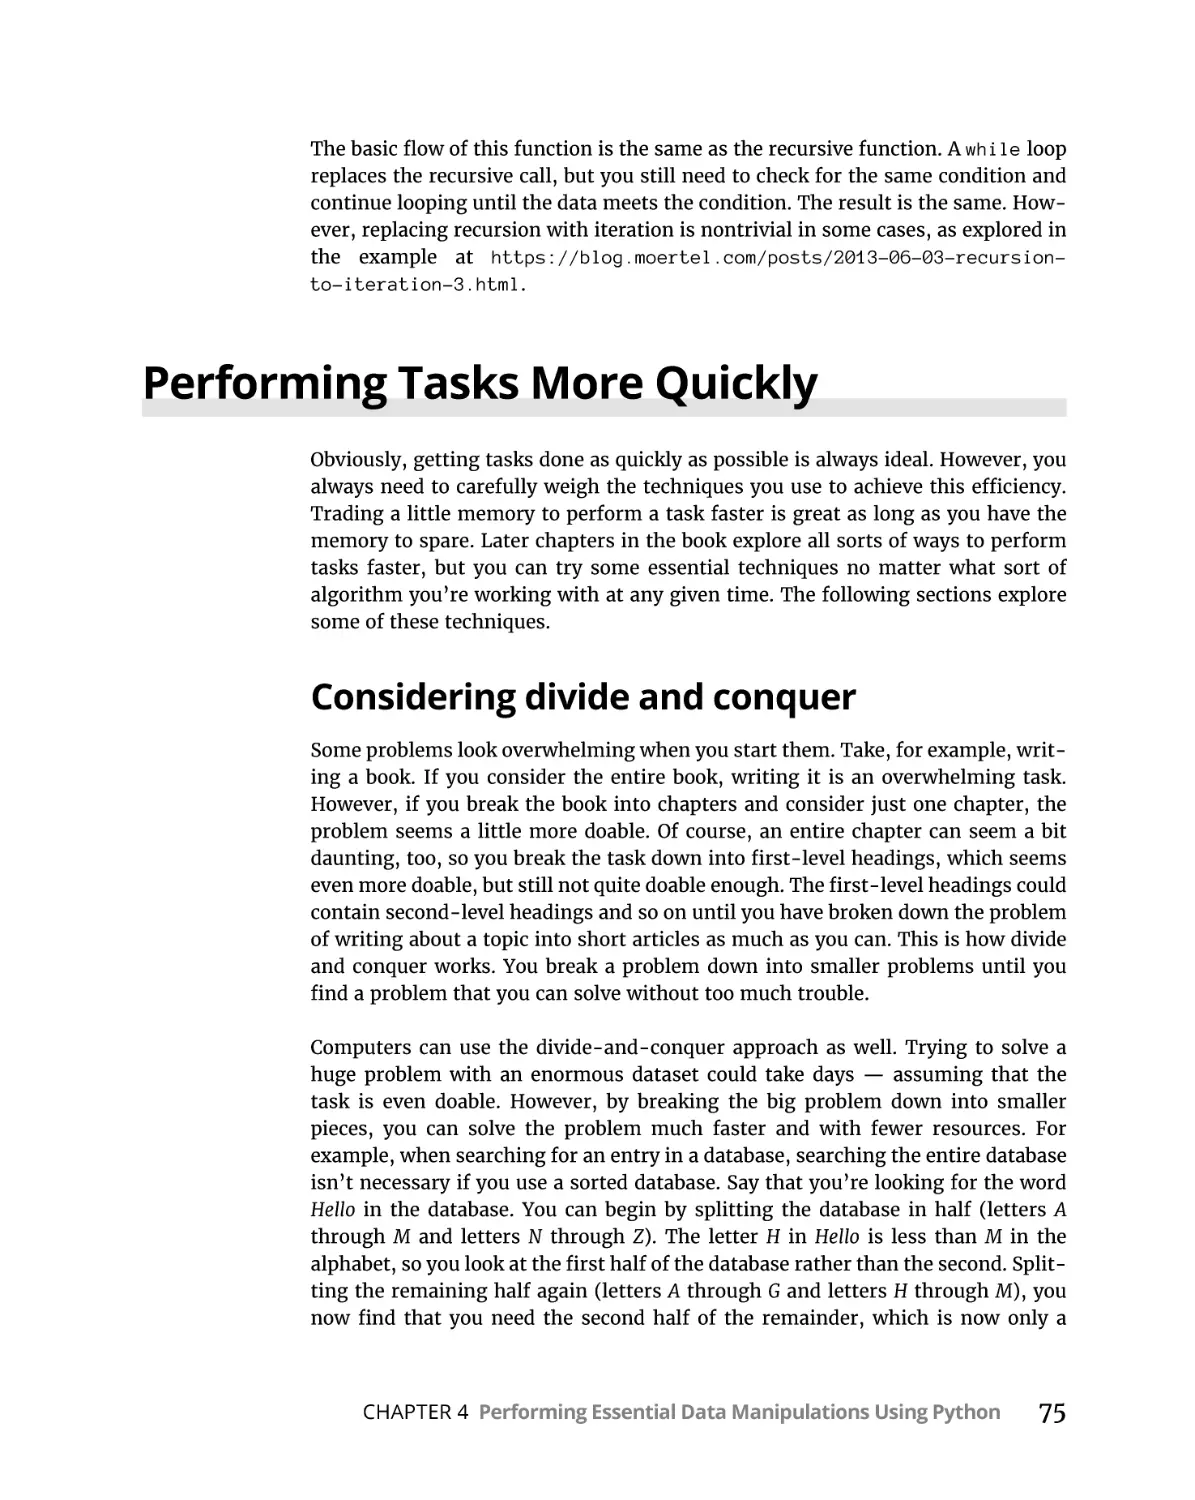 Performing Tasks More Quickly
Considering divide and conquer